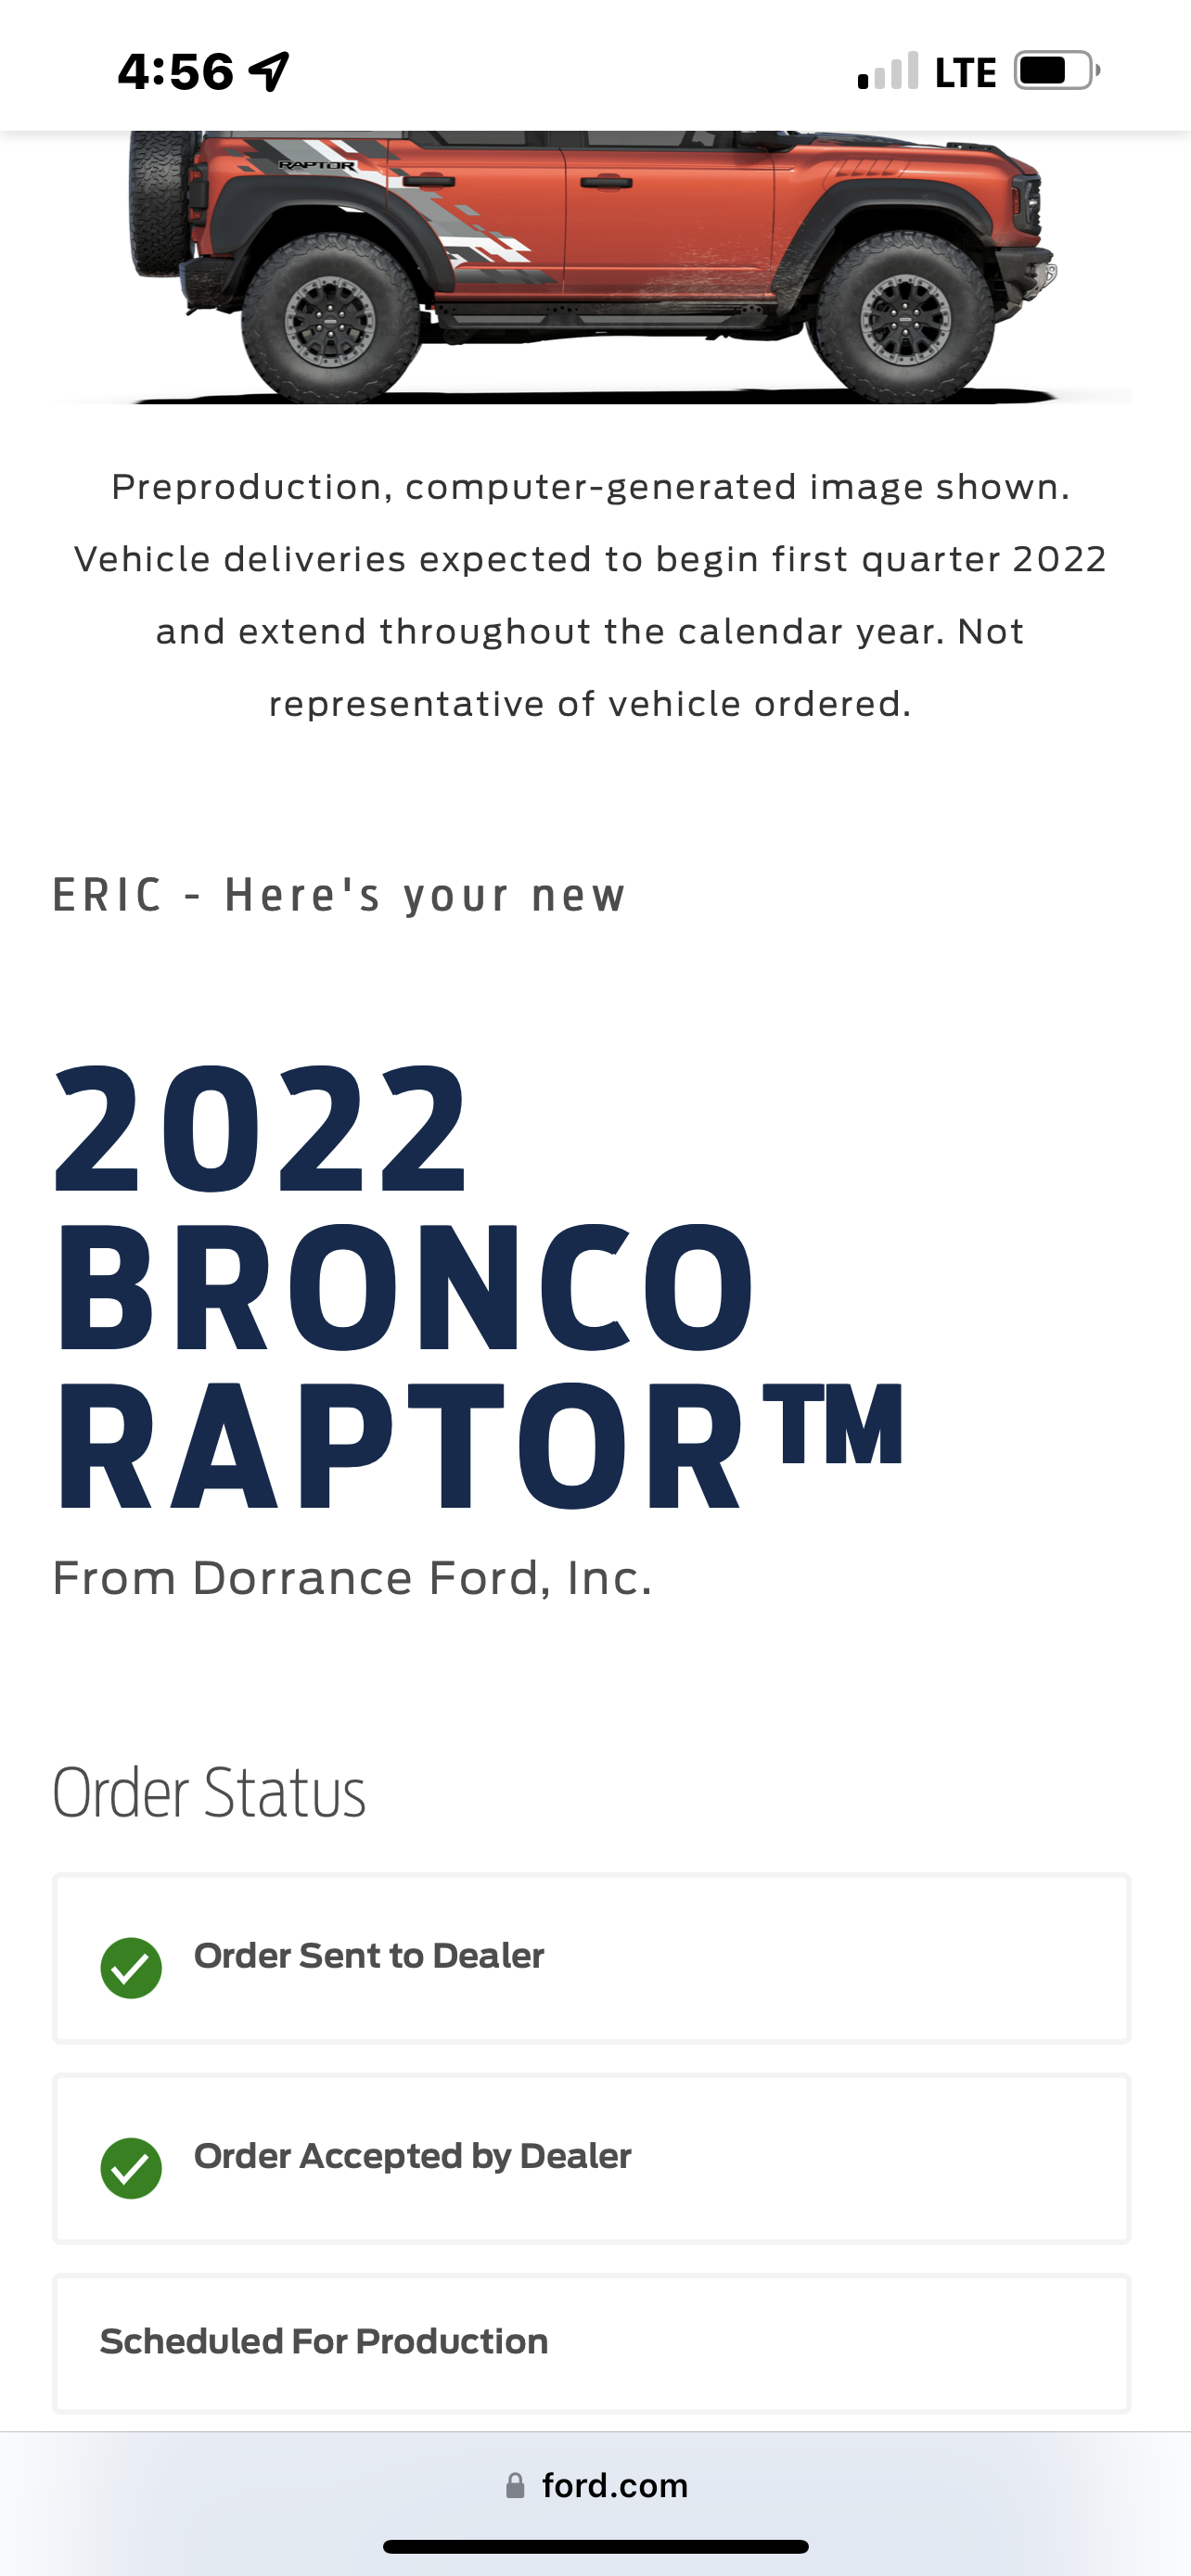 Ford Bronco ⏳ Bronco Raptor now being scheduled for production & VIN assigned ADA3669C-1384-45F8-9435-925E2E1258D0